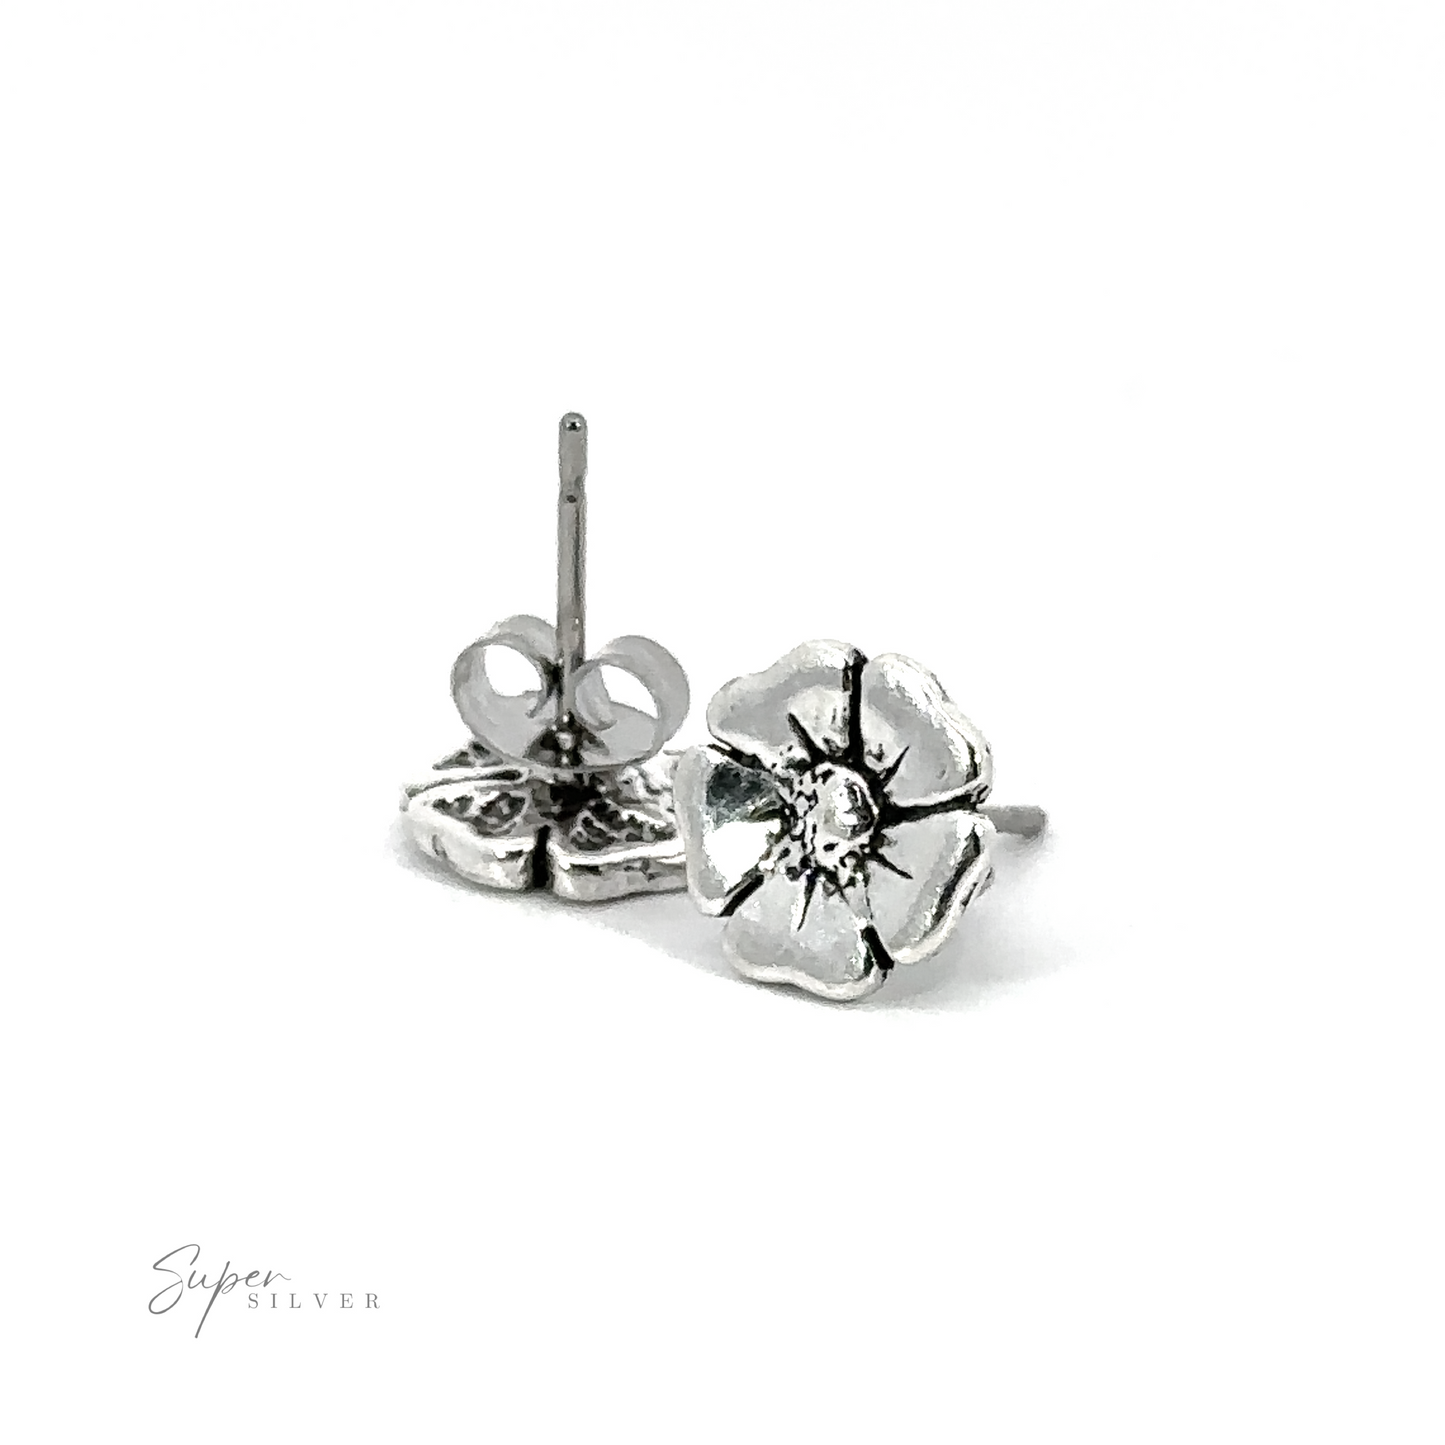 A pair of adorable Poppy Flower Studs.